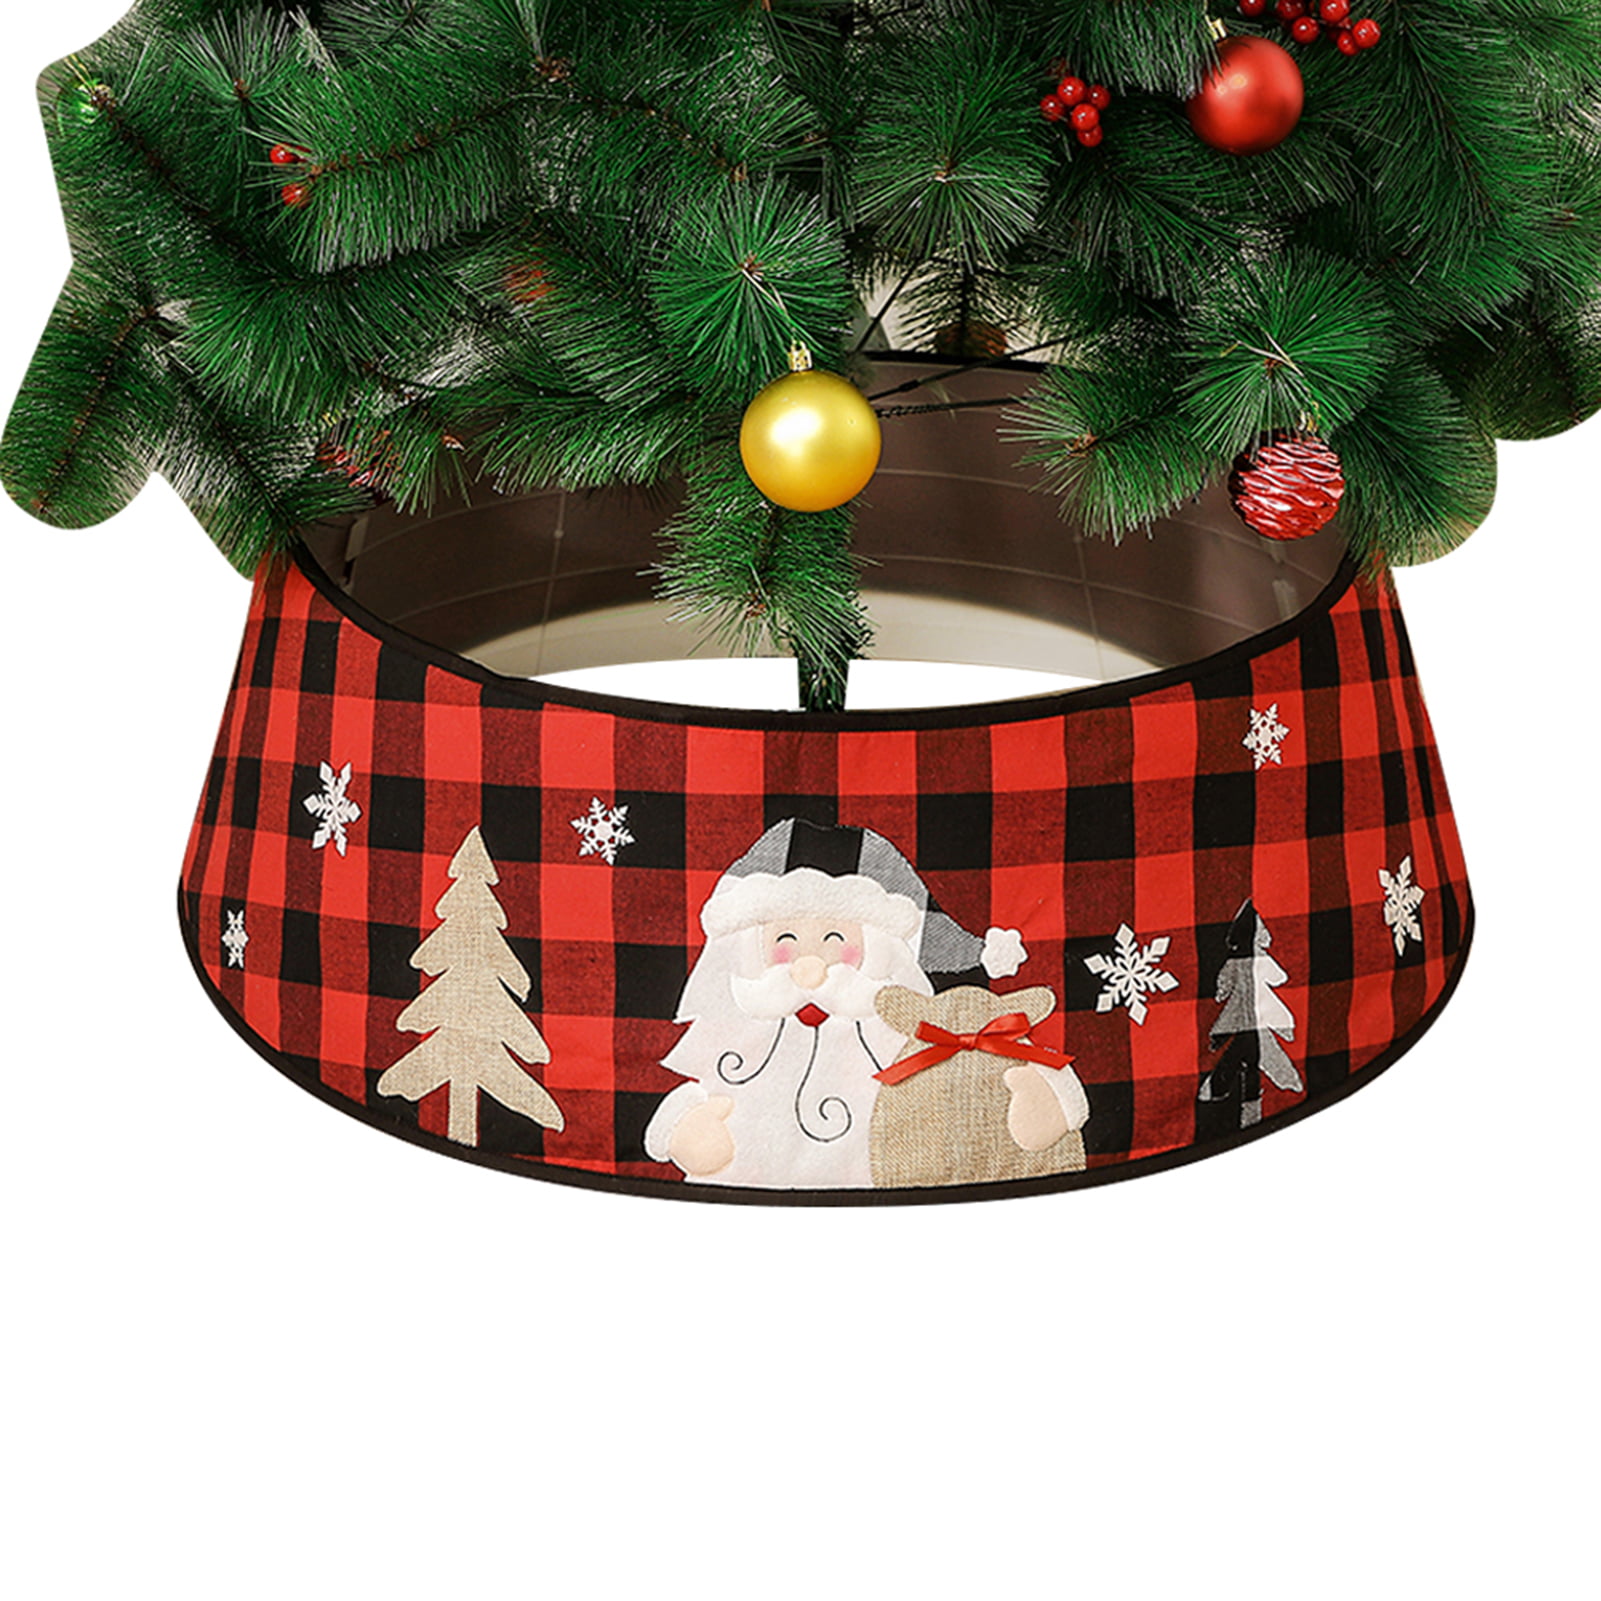 New Traditions White Velvet with Gold Glitter Quatrefoil Print Christmas Tree Collar Stand Band